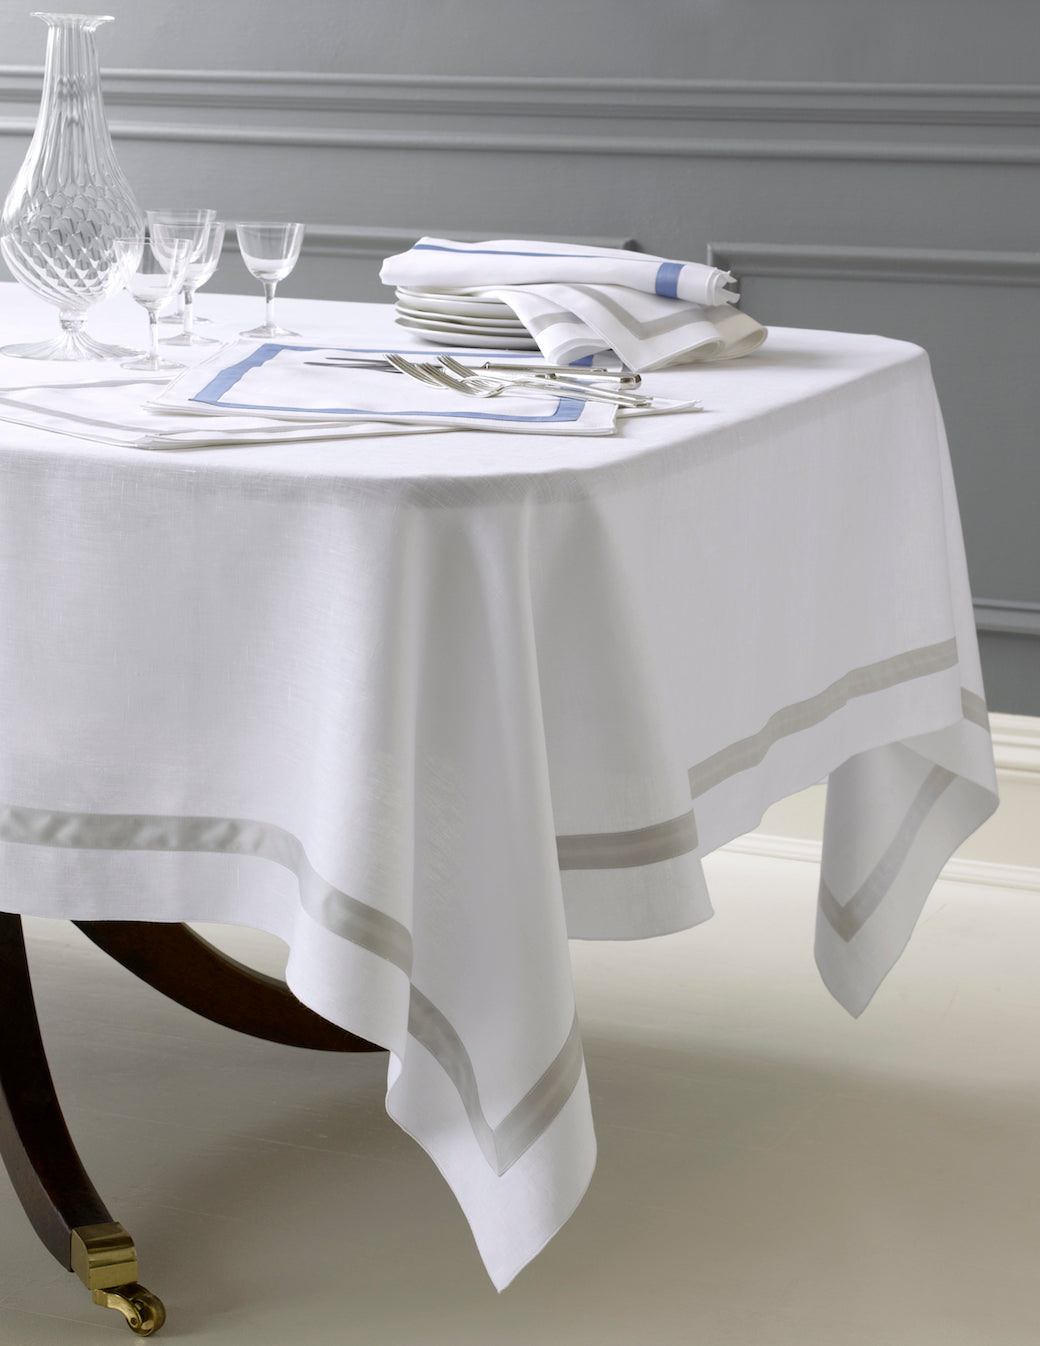 Lowell Table Linens - Pioneer Linens